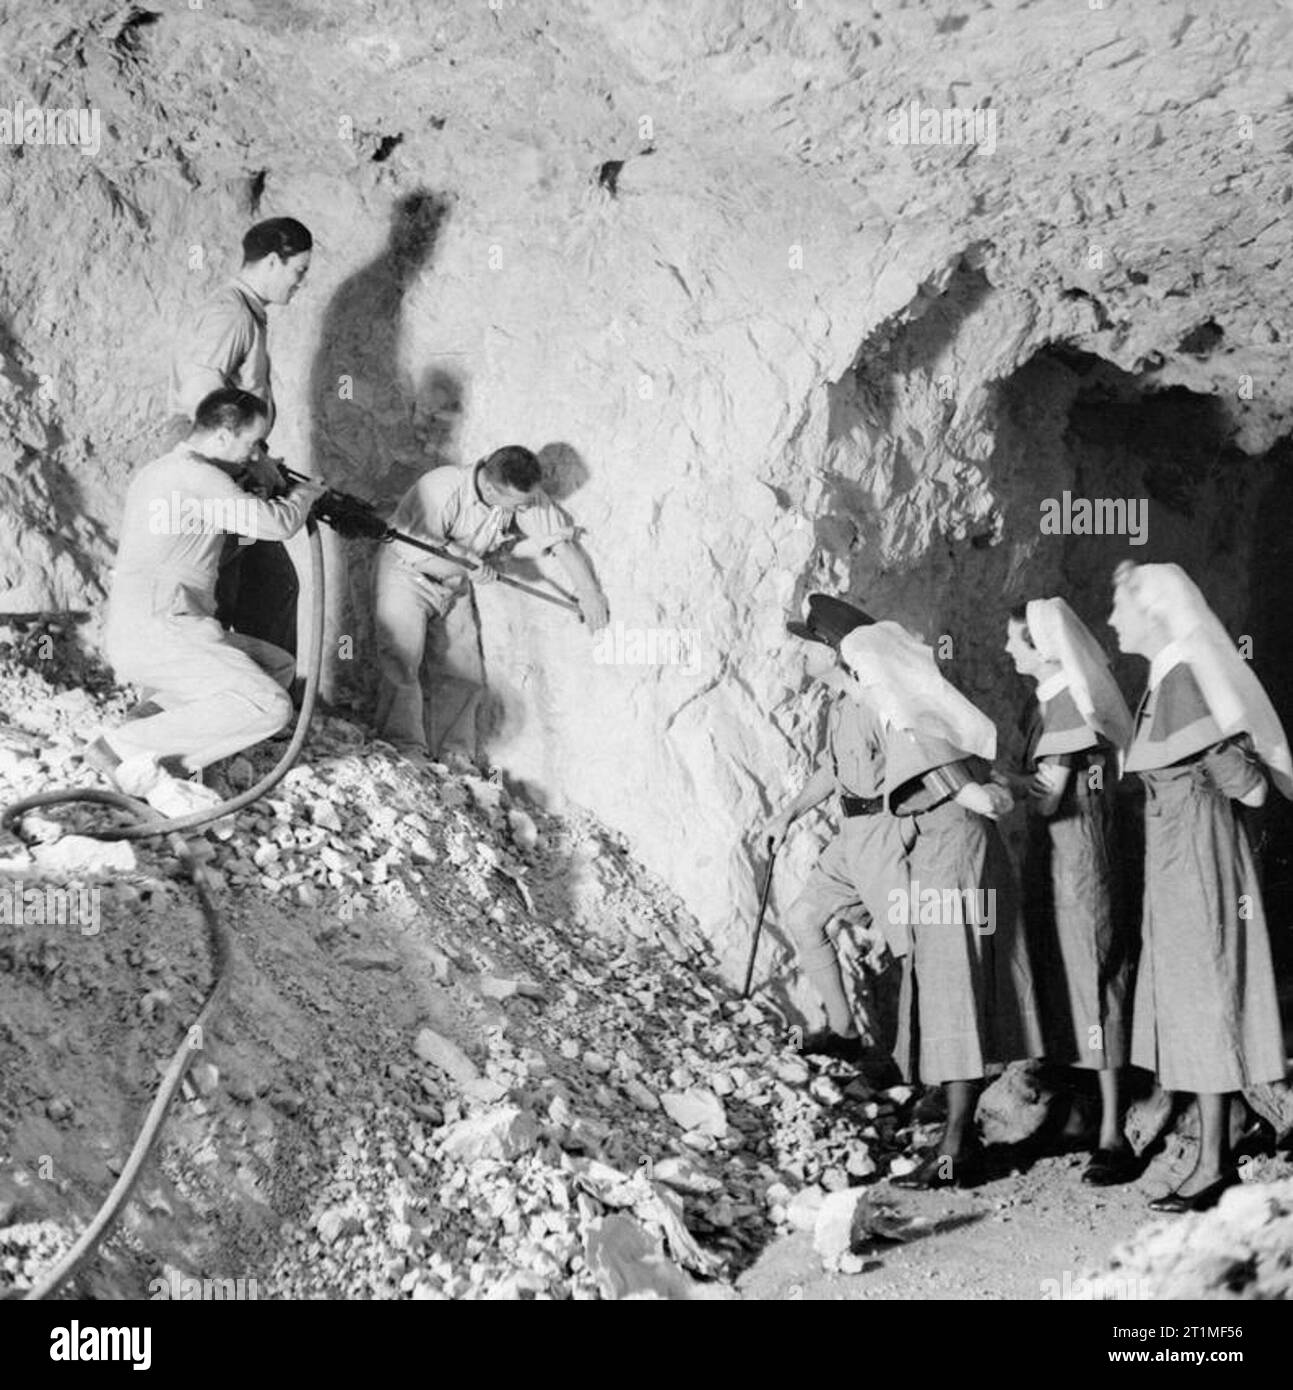 In a Gibralter Underground Hospital When most of the civilian population of Gibralter was evacuated, a hospital was established in one of the air raid shelters cut into the solid rock. It is constantly being added to and is ready for any eventuality. The work of excavation is being done by Civilian engineers, leaving the Royal Engineers to concentrate on defence works. This image shows skilled civilian workmen of the new City Council's staff engaged in construction of a new ward of the hospital. Officer Commanding Hospital and Nursing Staff look on. Stock Photo